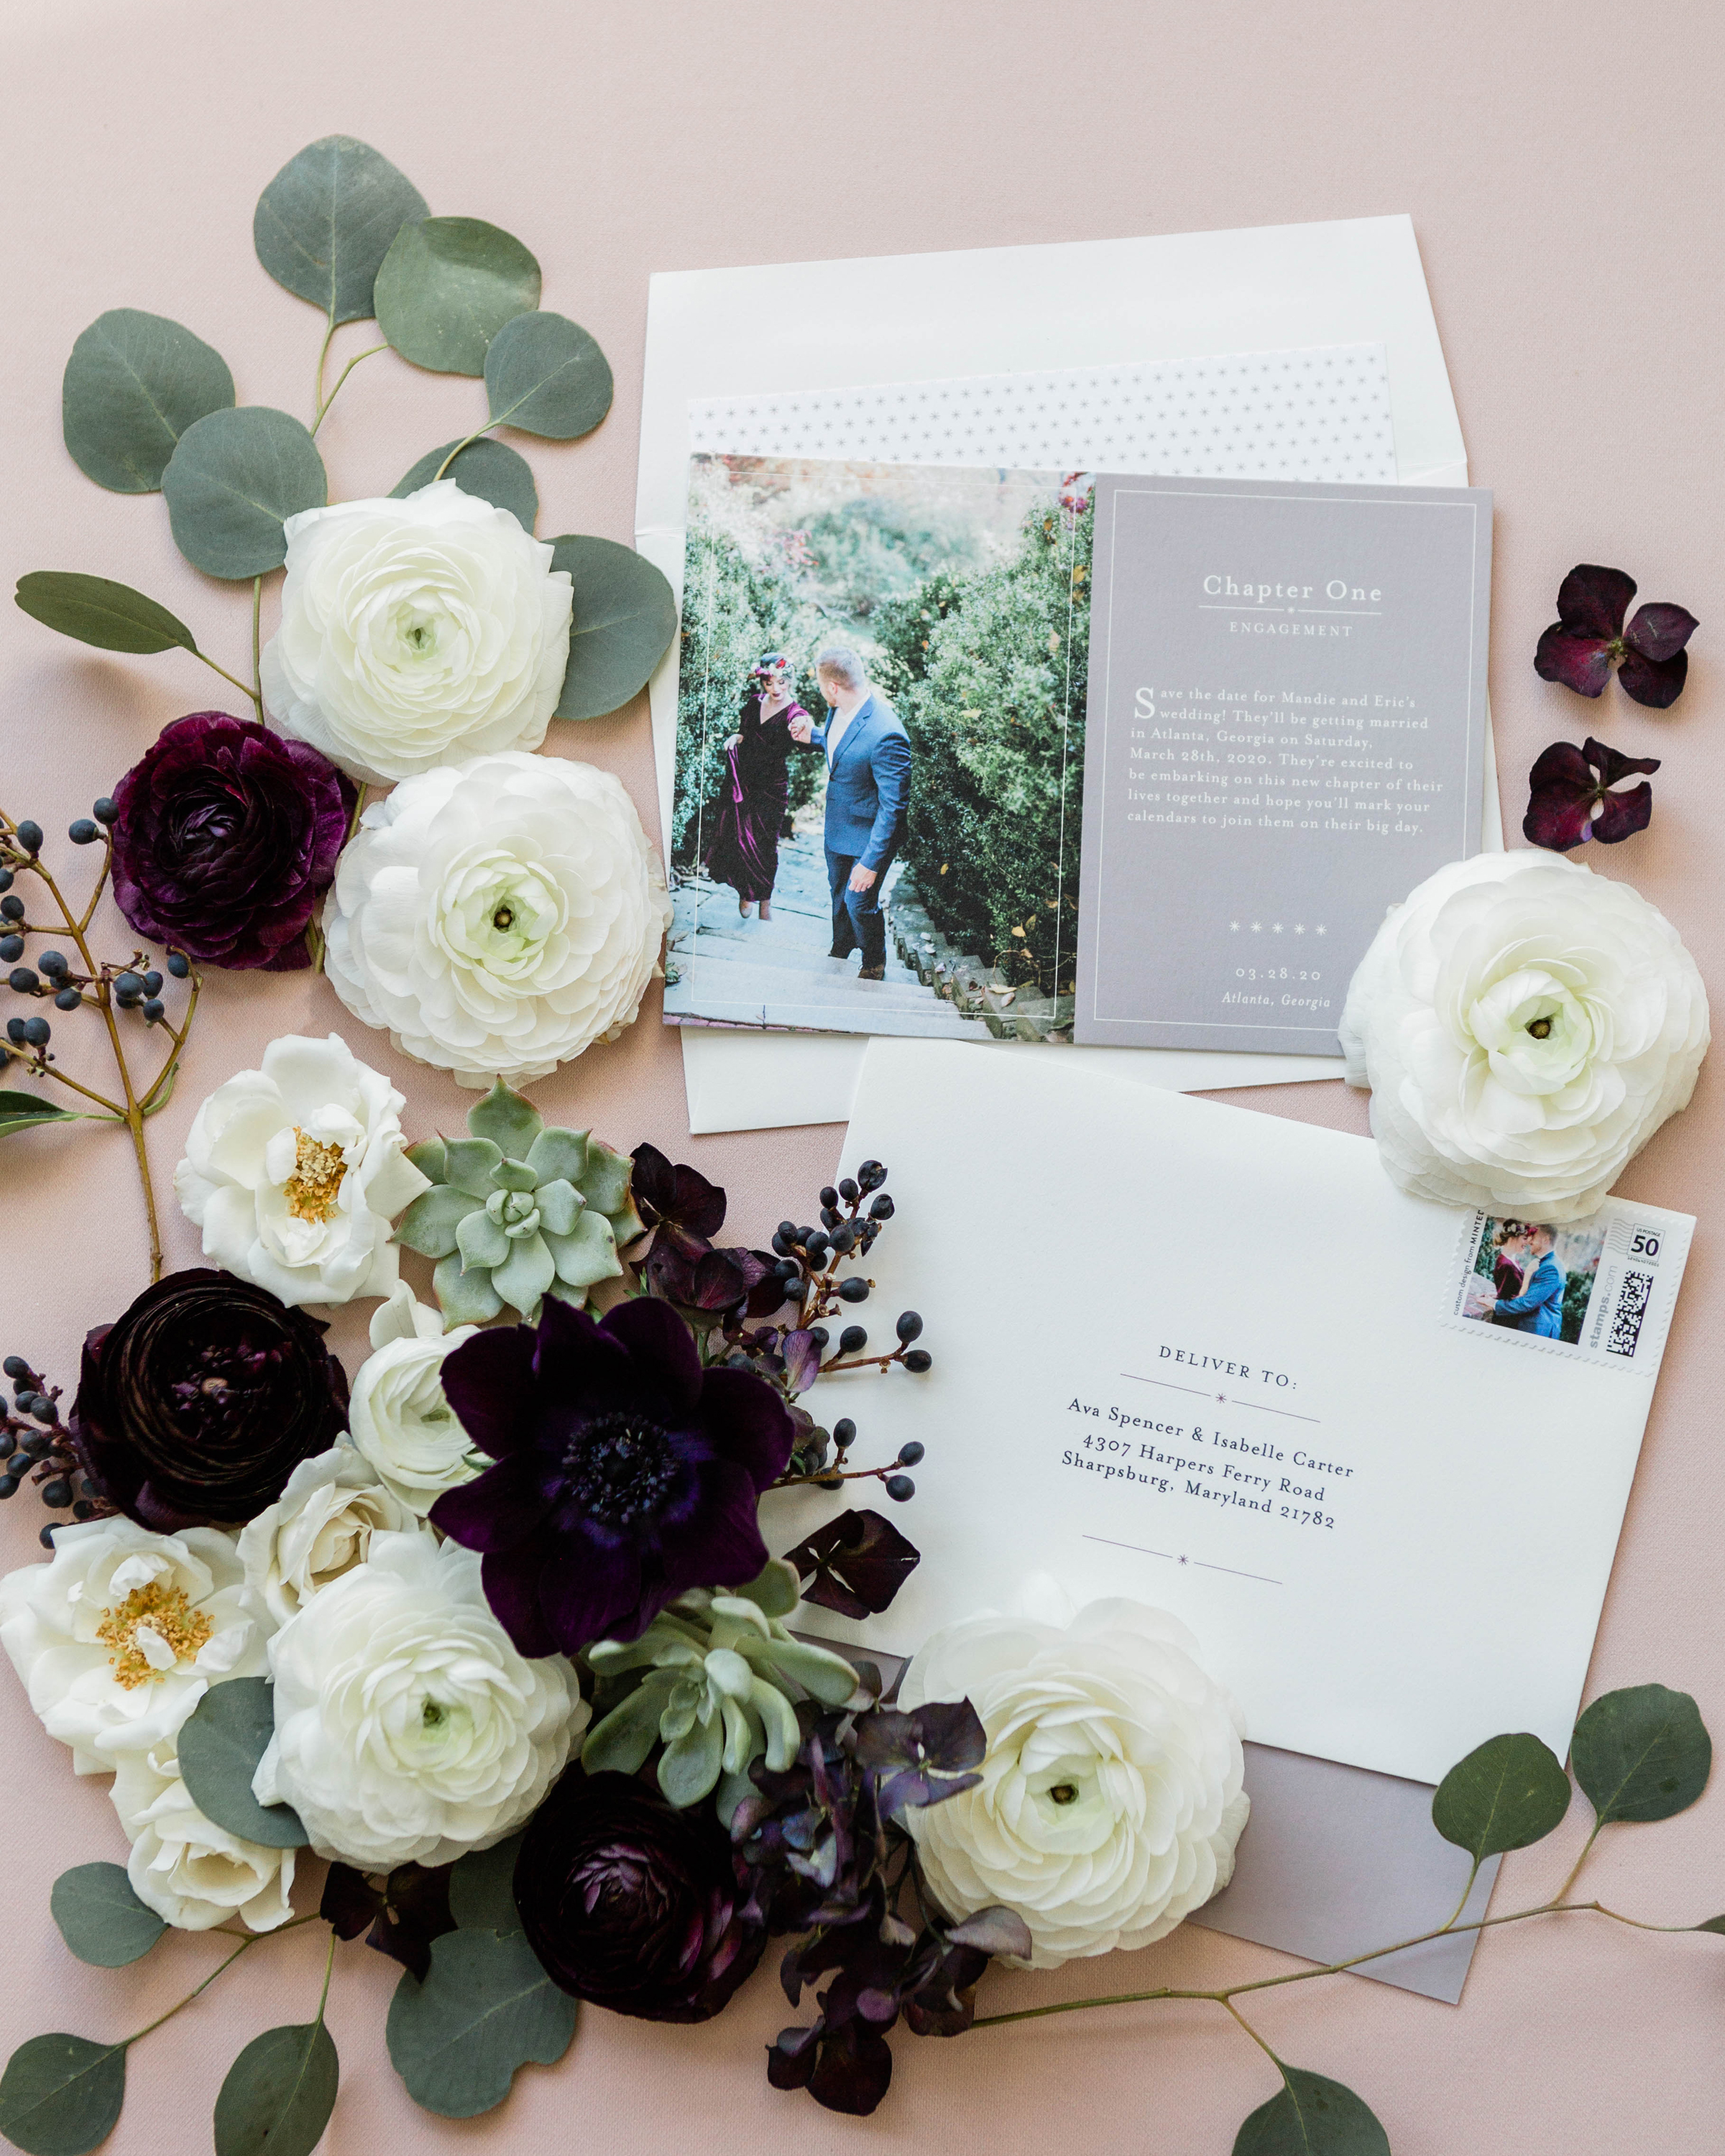 Customizable Save the Dates from Minted